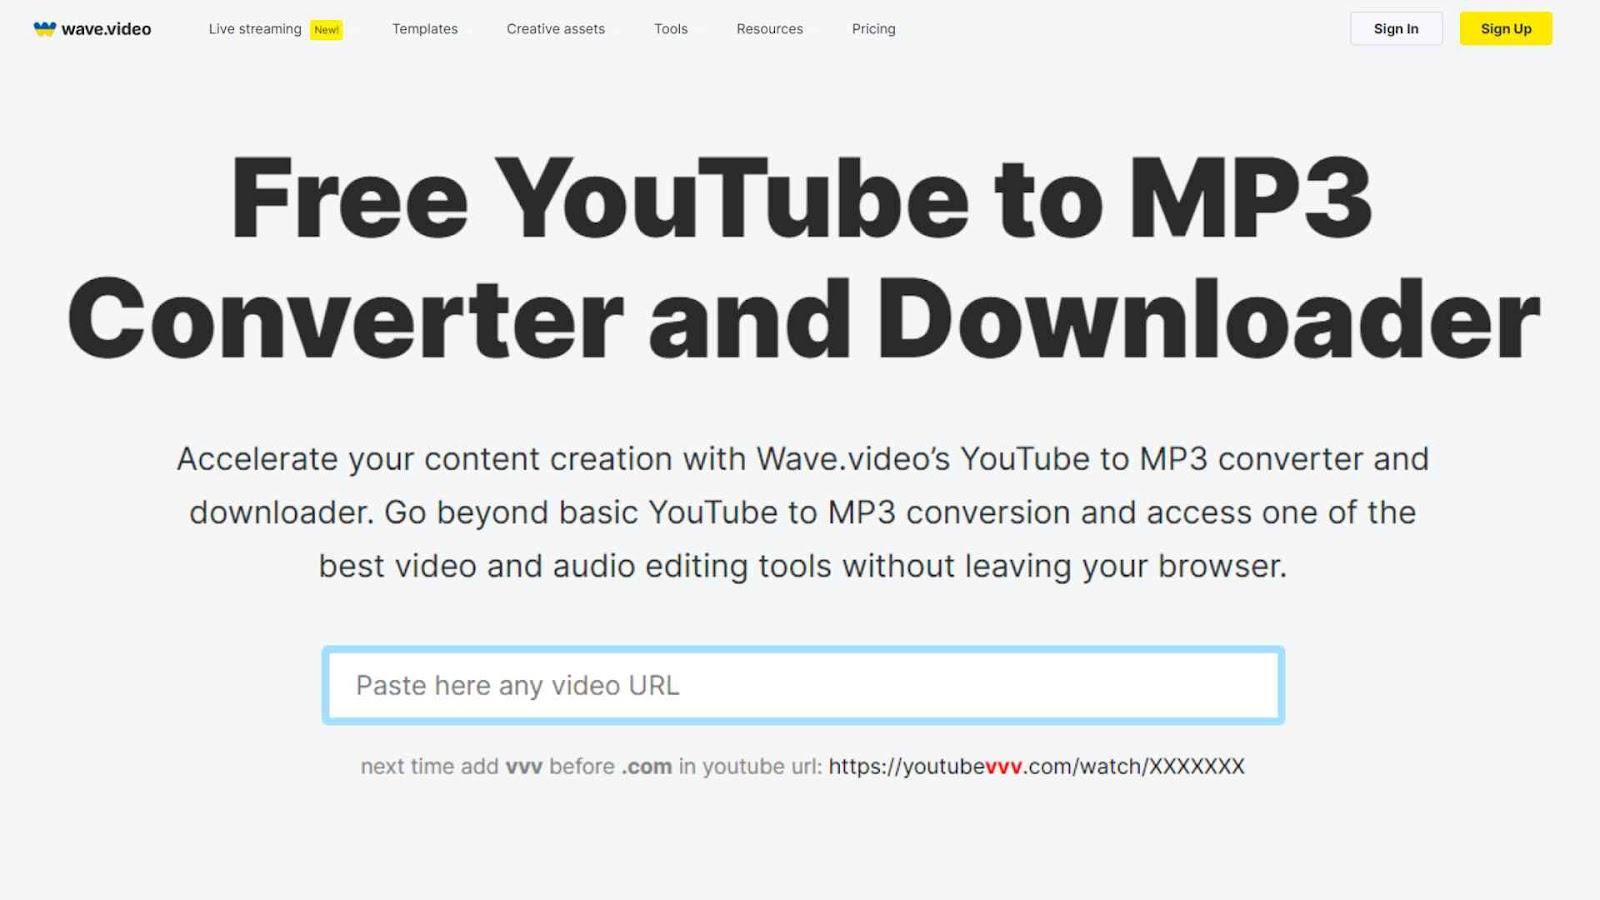 MP3Studio Downloader Review 2023: Benefits and Pricing